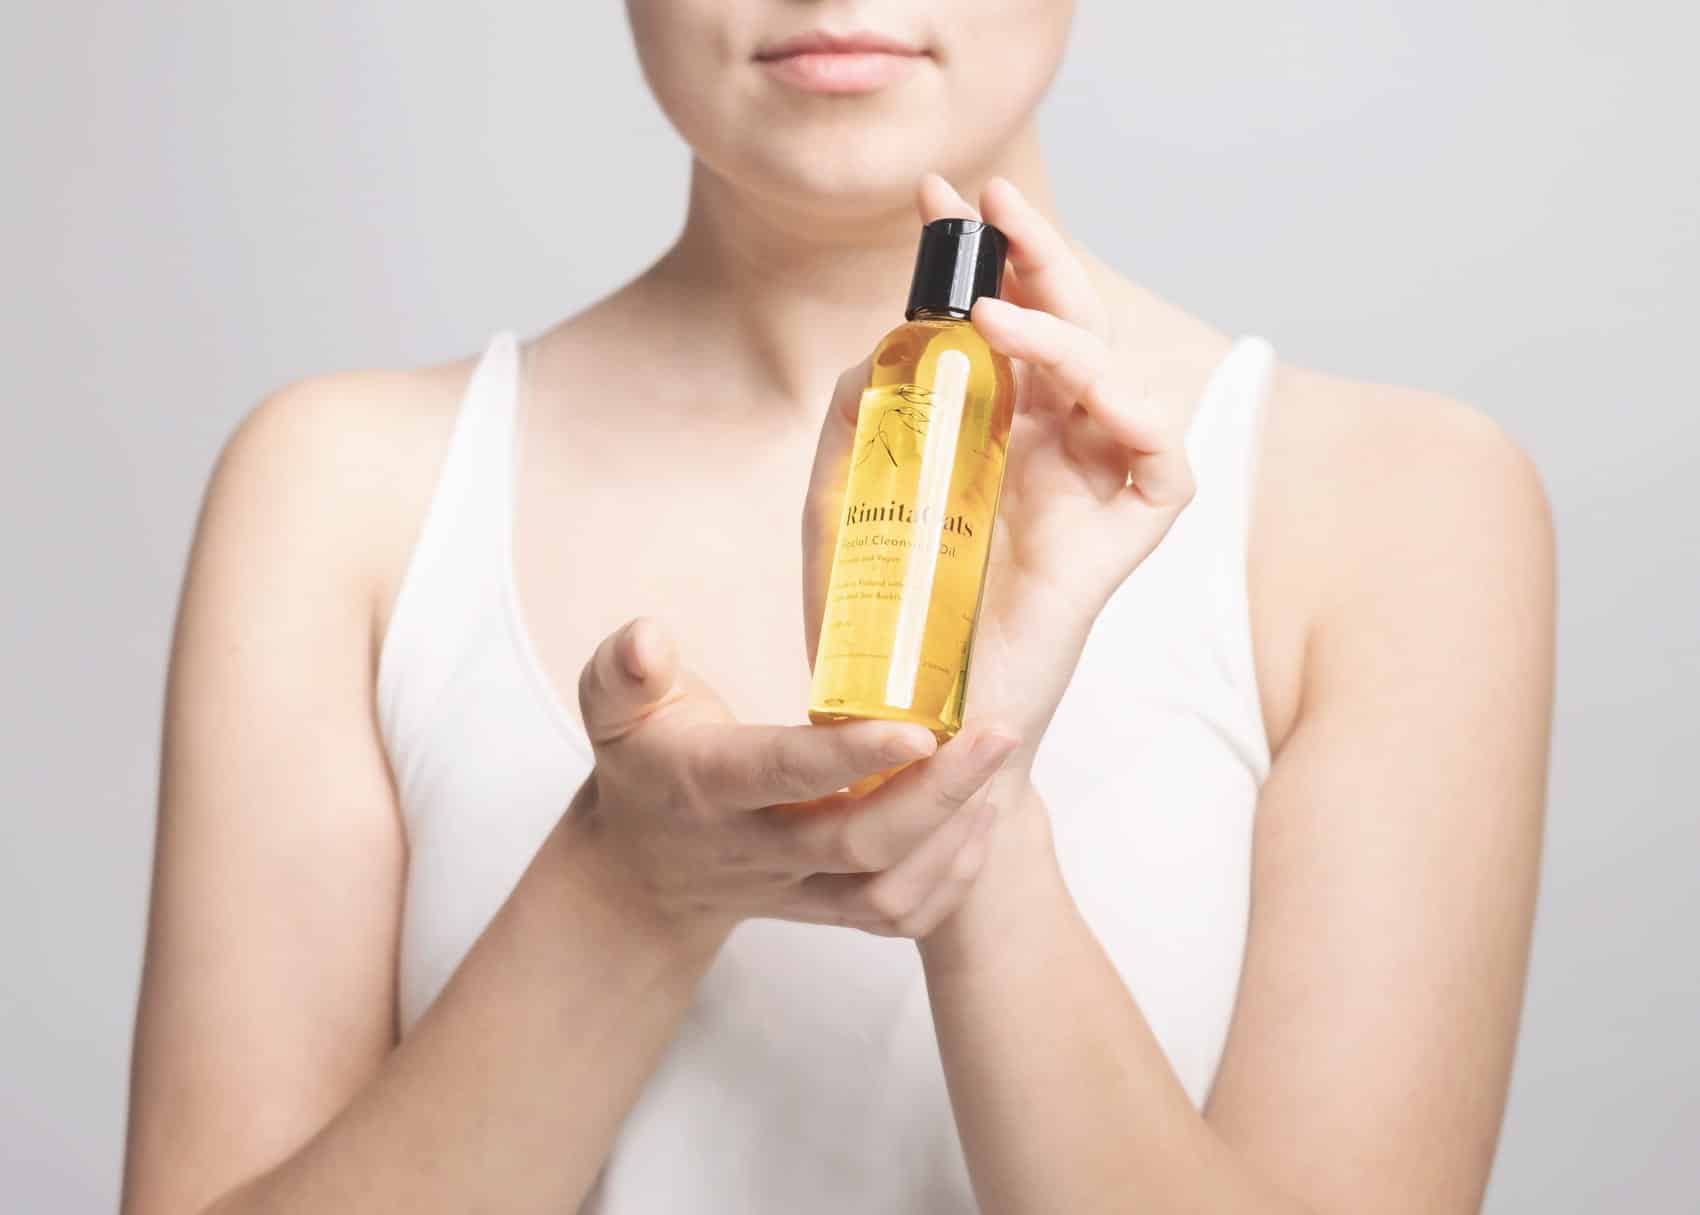 RimitaOats Facial Cleansing Oil product launch